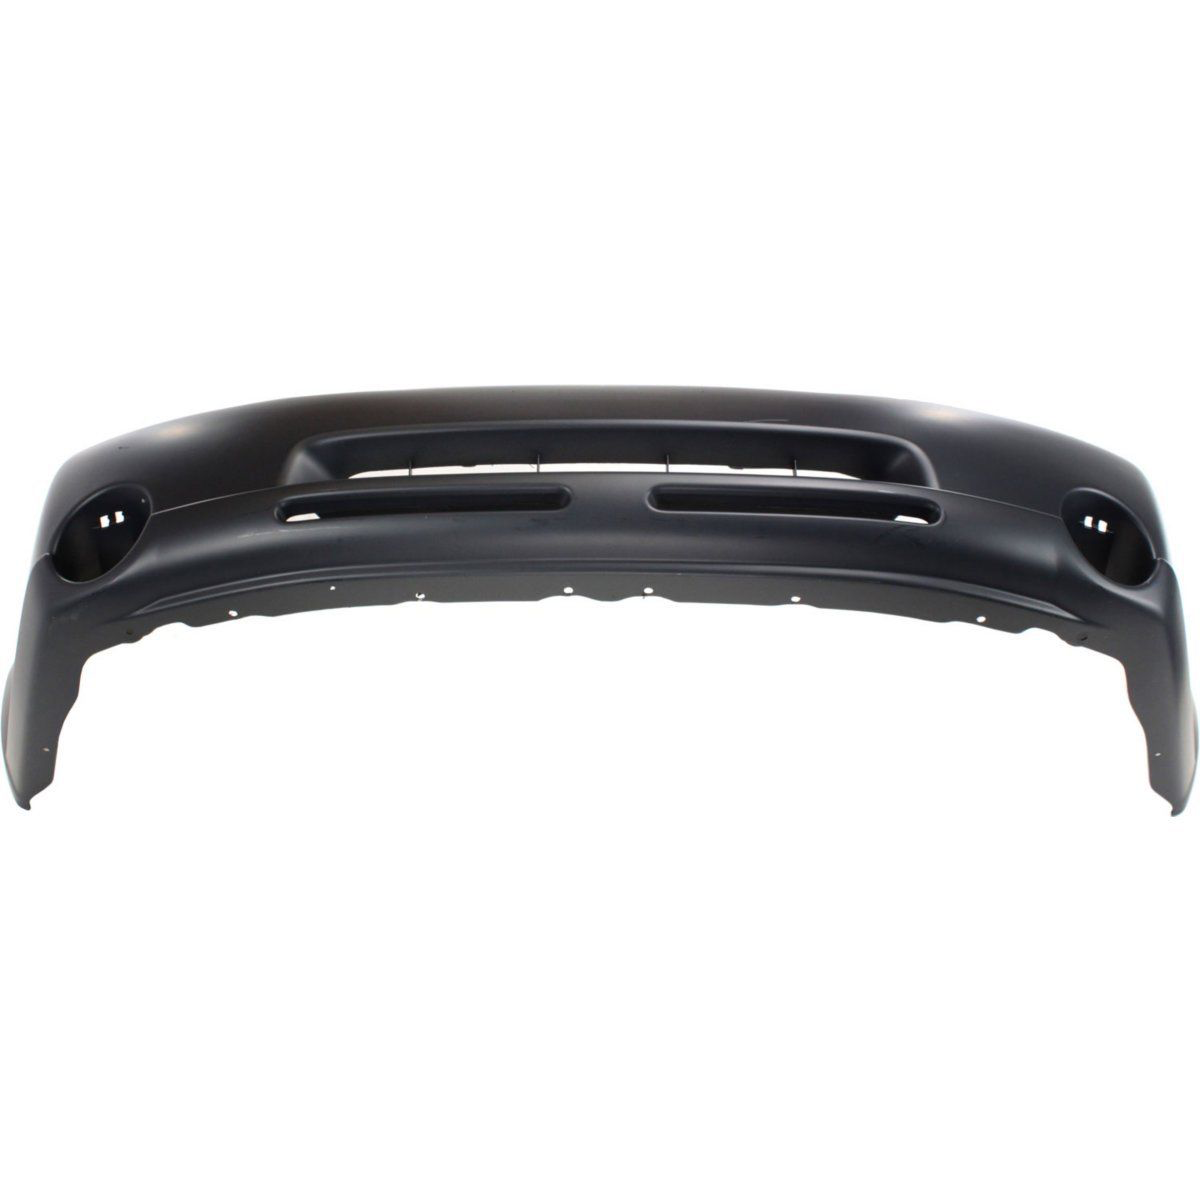 2000-2001 NISSAN MAXIMA Front Bumper Cover Painted to Match